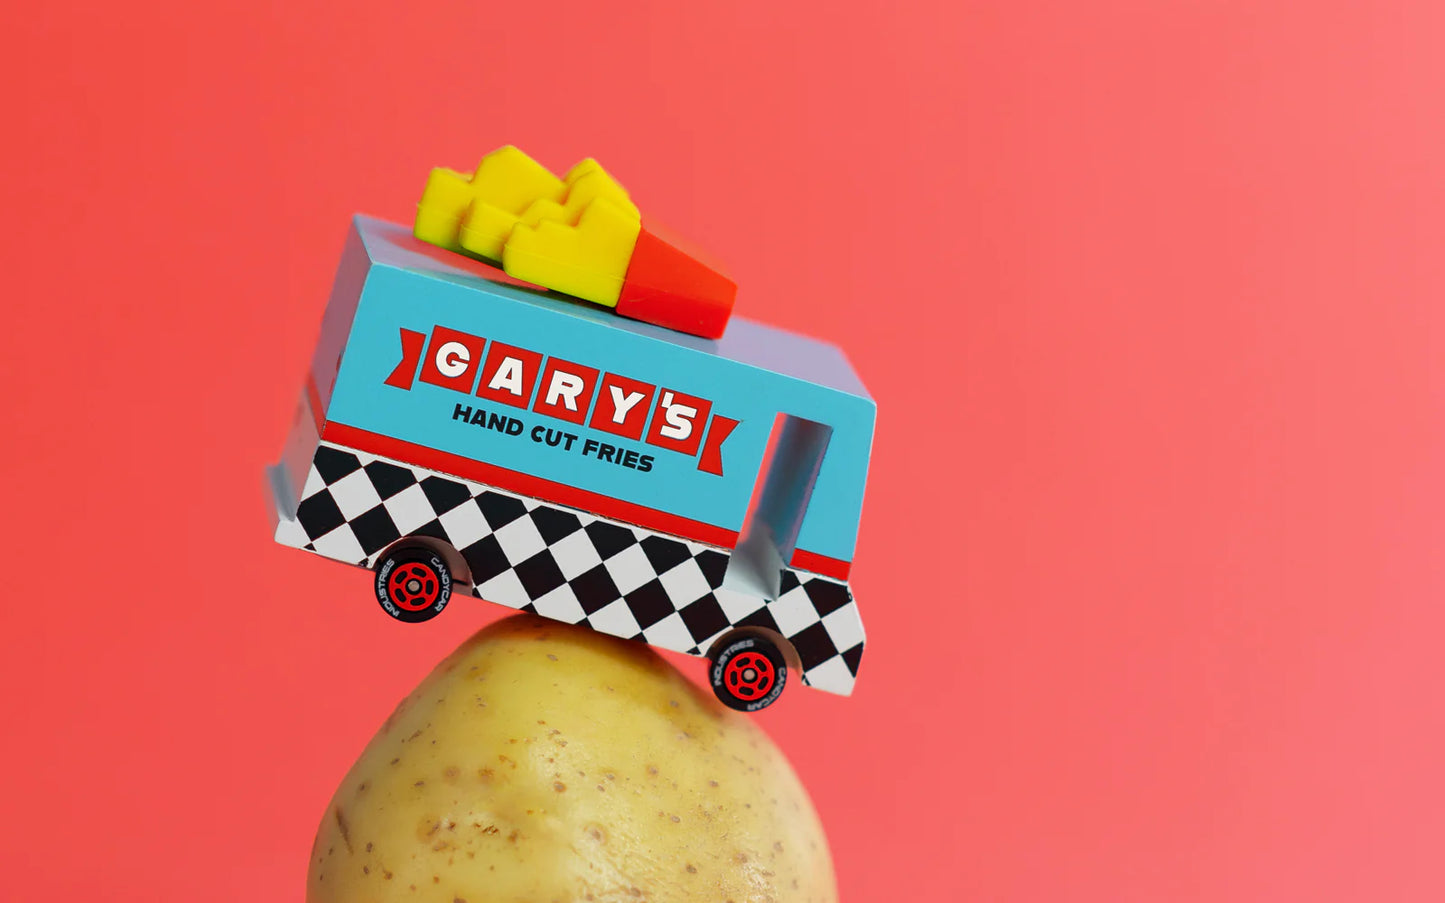 Candylab Gary's French Fry Van wood and diecast toy car for kids